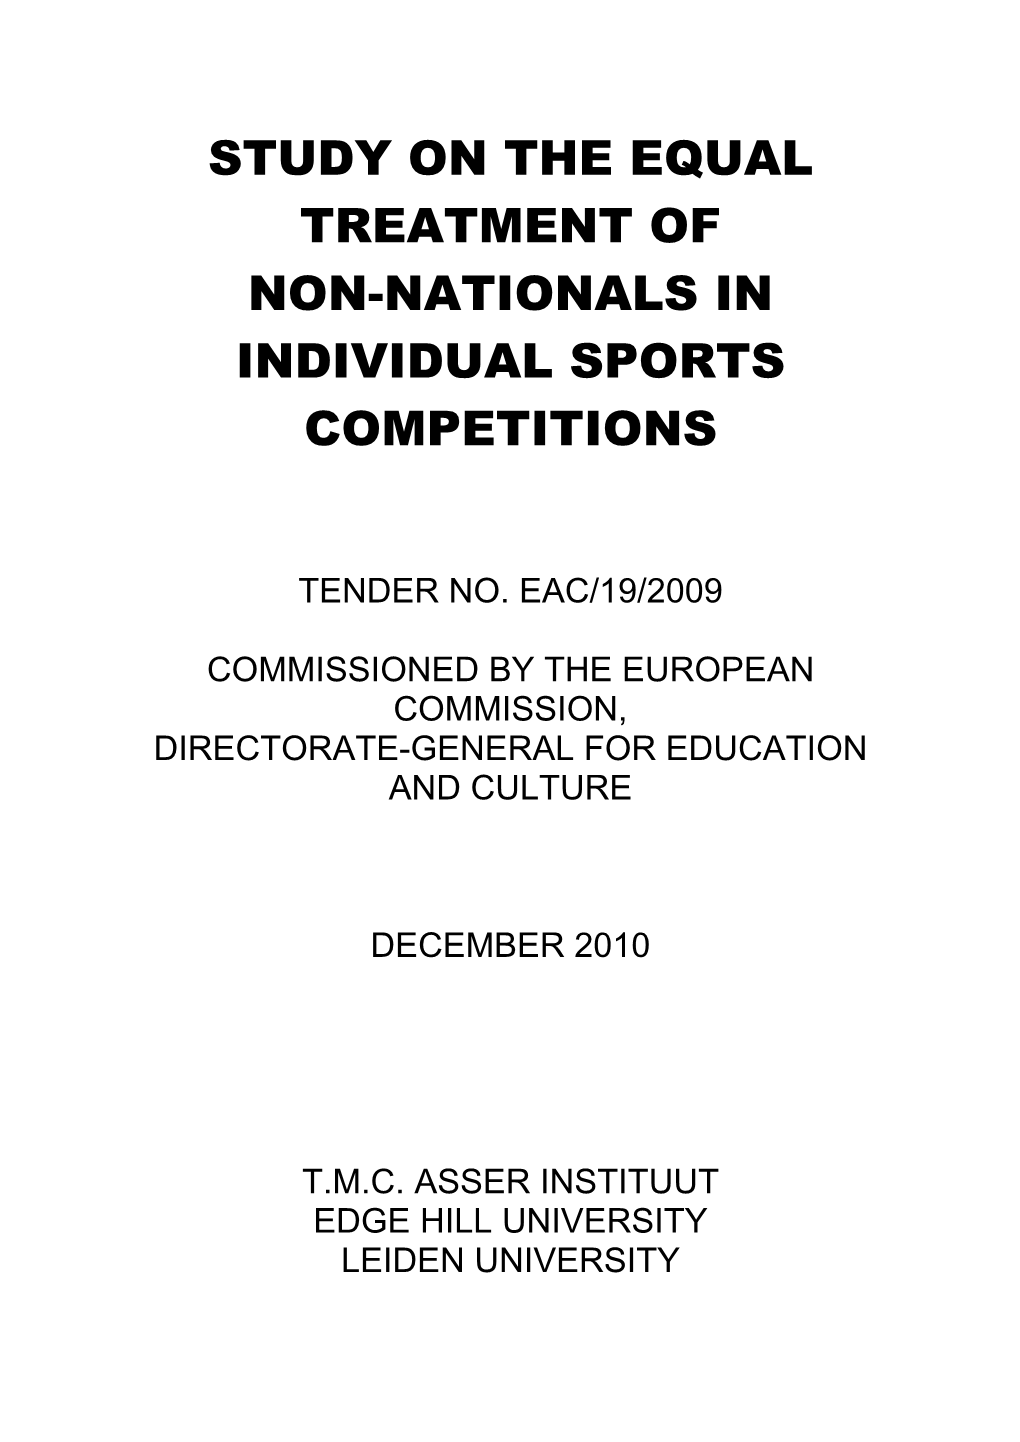 Study on the Equal Treatment of Non-Nationals in Individual Sports Competitions